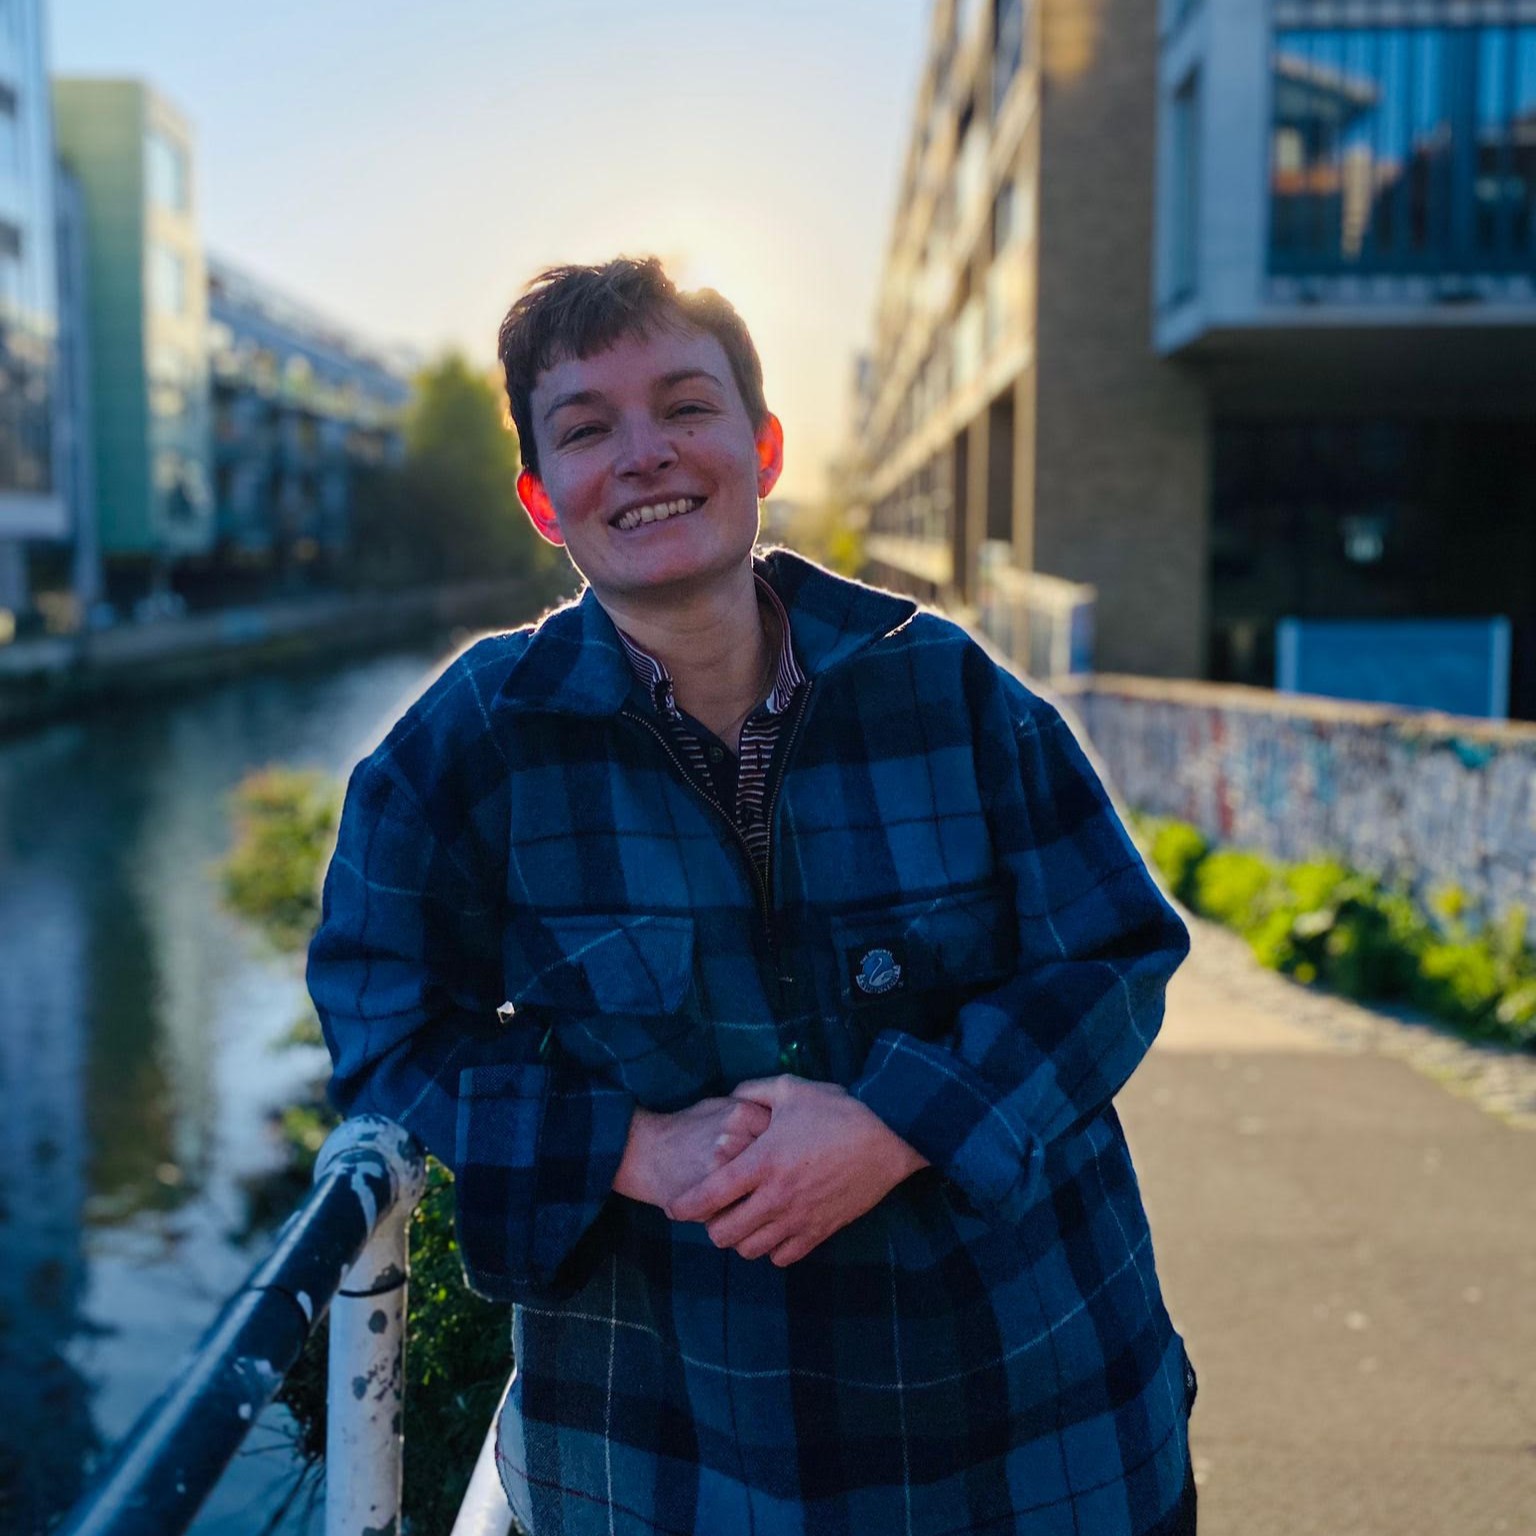 Tommy is leaning on a rail and smiling at the camera. They are standing on the bank of a canal and there is low sunlight shining behind them. They are wearing a blue flannel shirt.